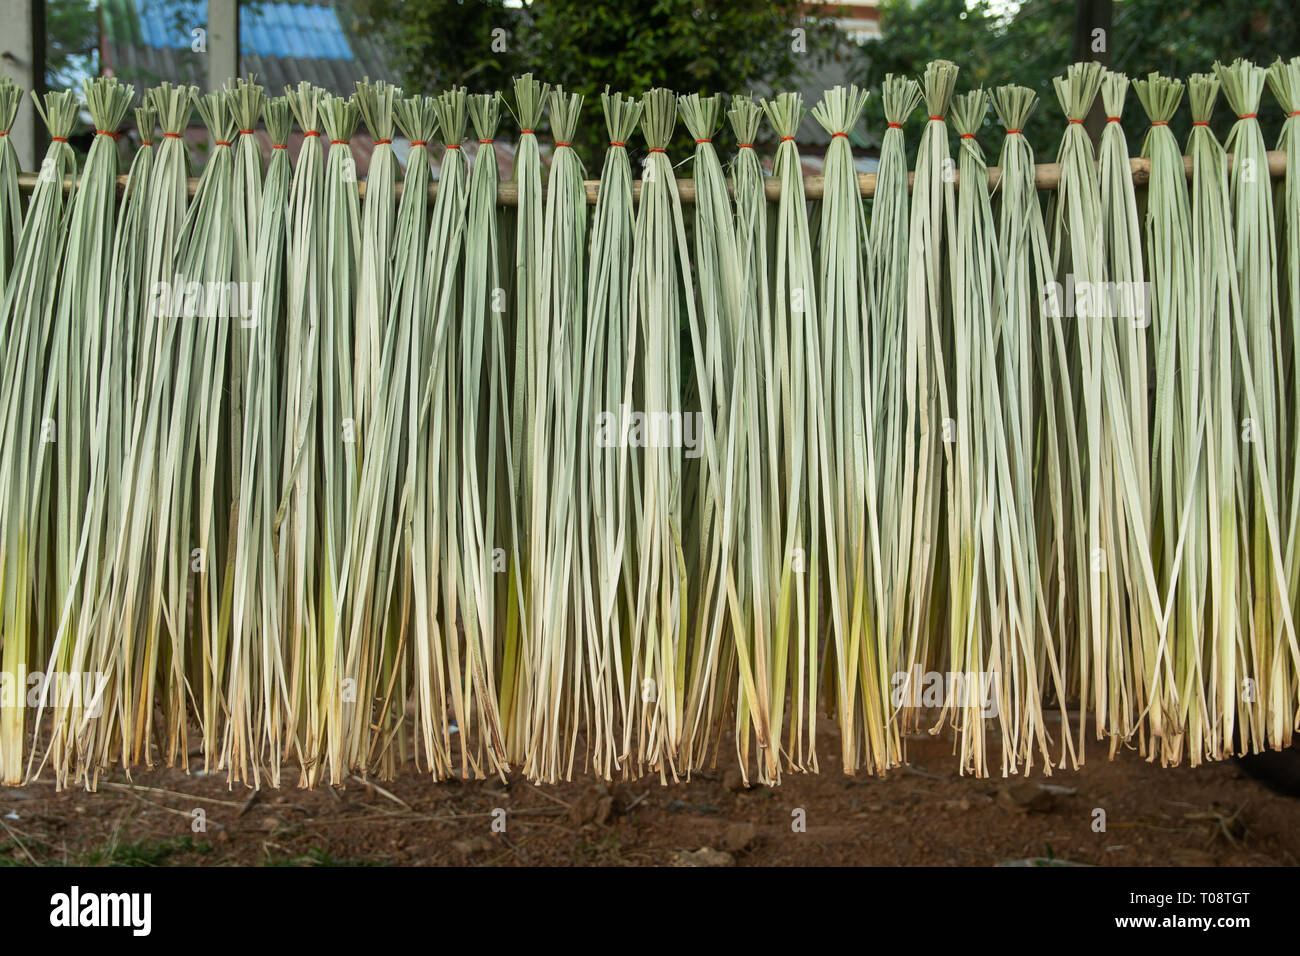 Cyperus imbricatus or reed dried for made reed mats Stock Photo